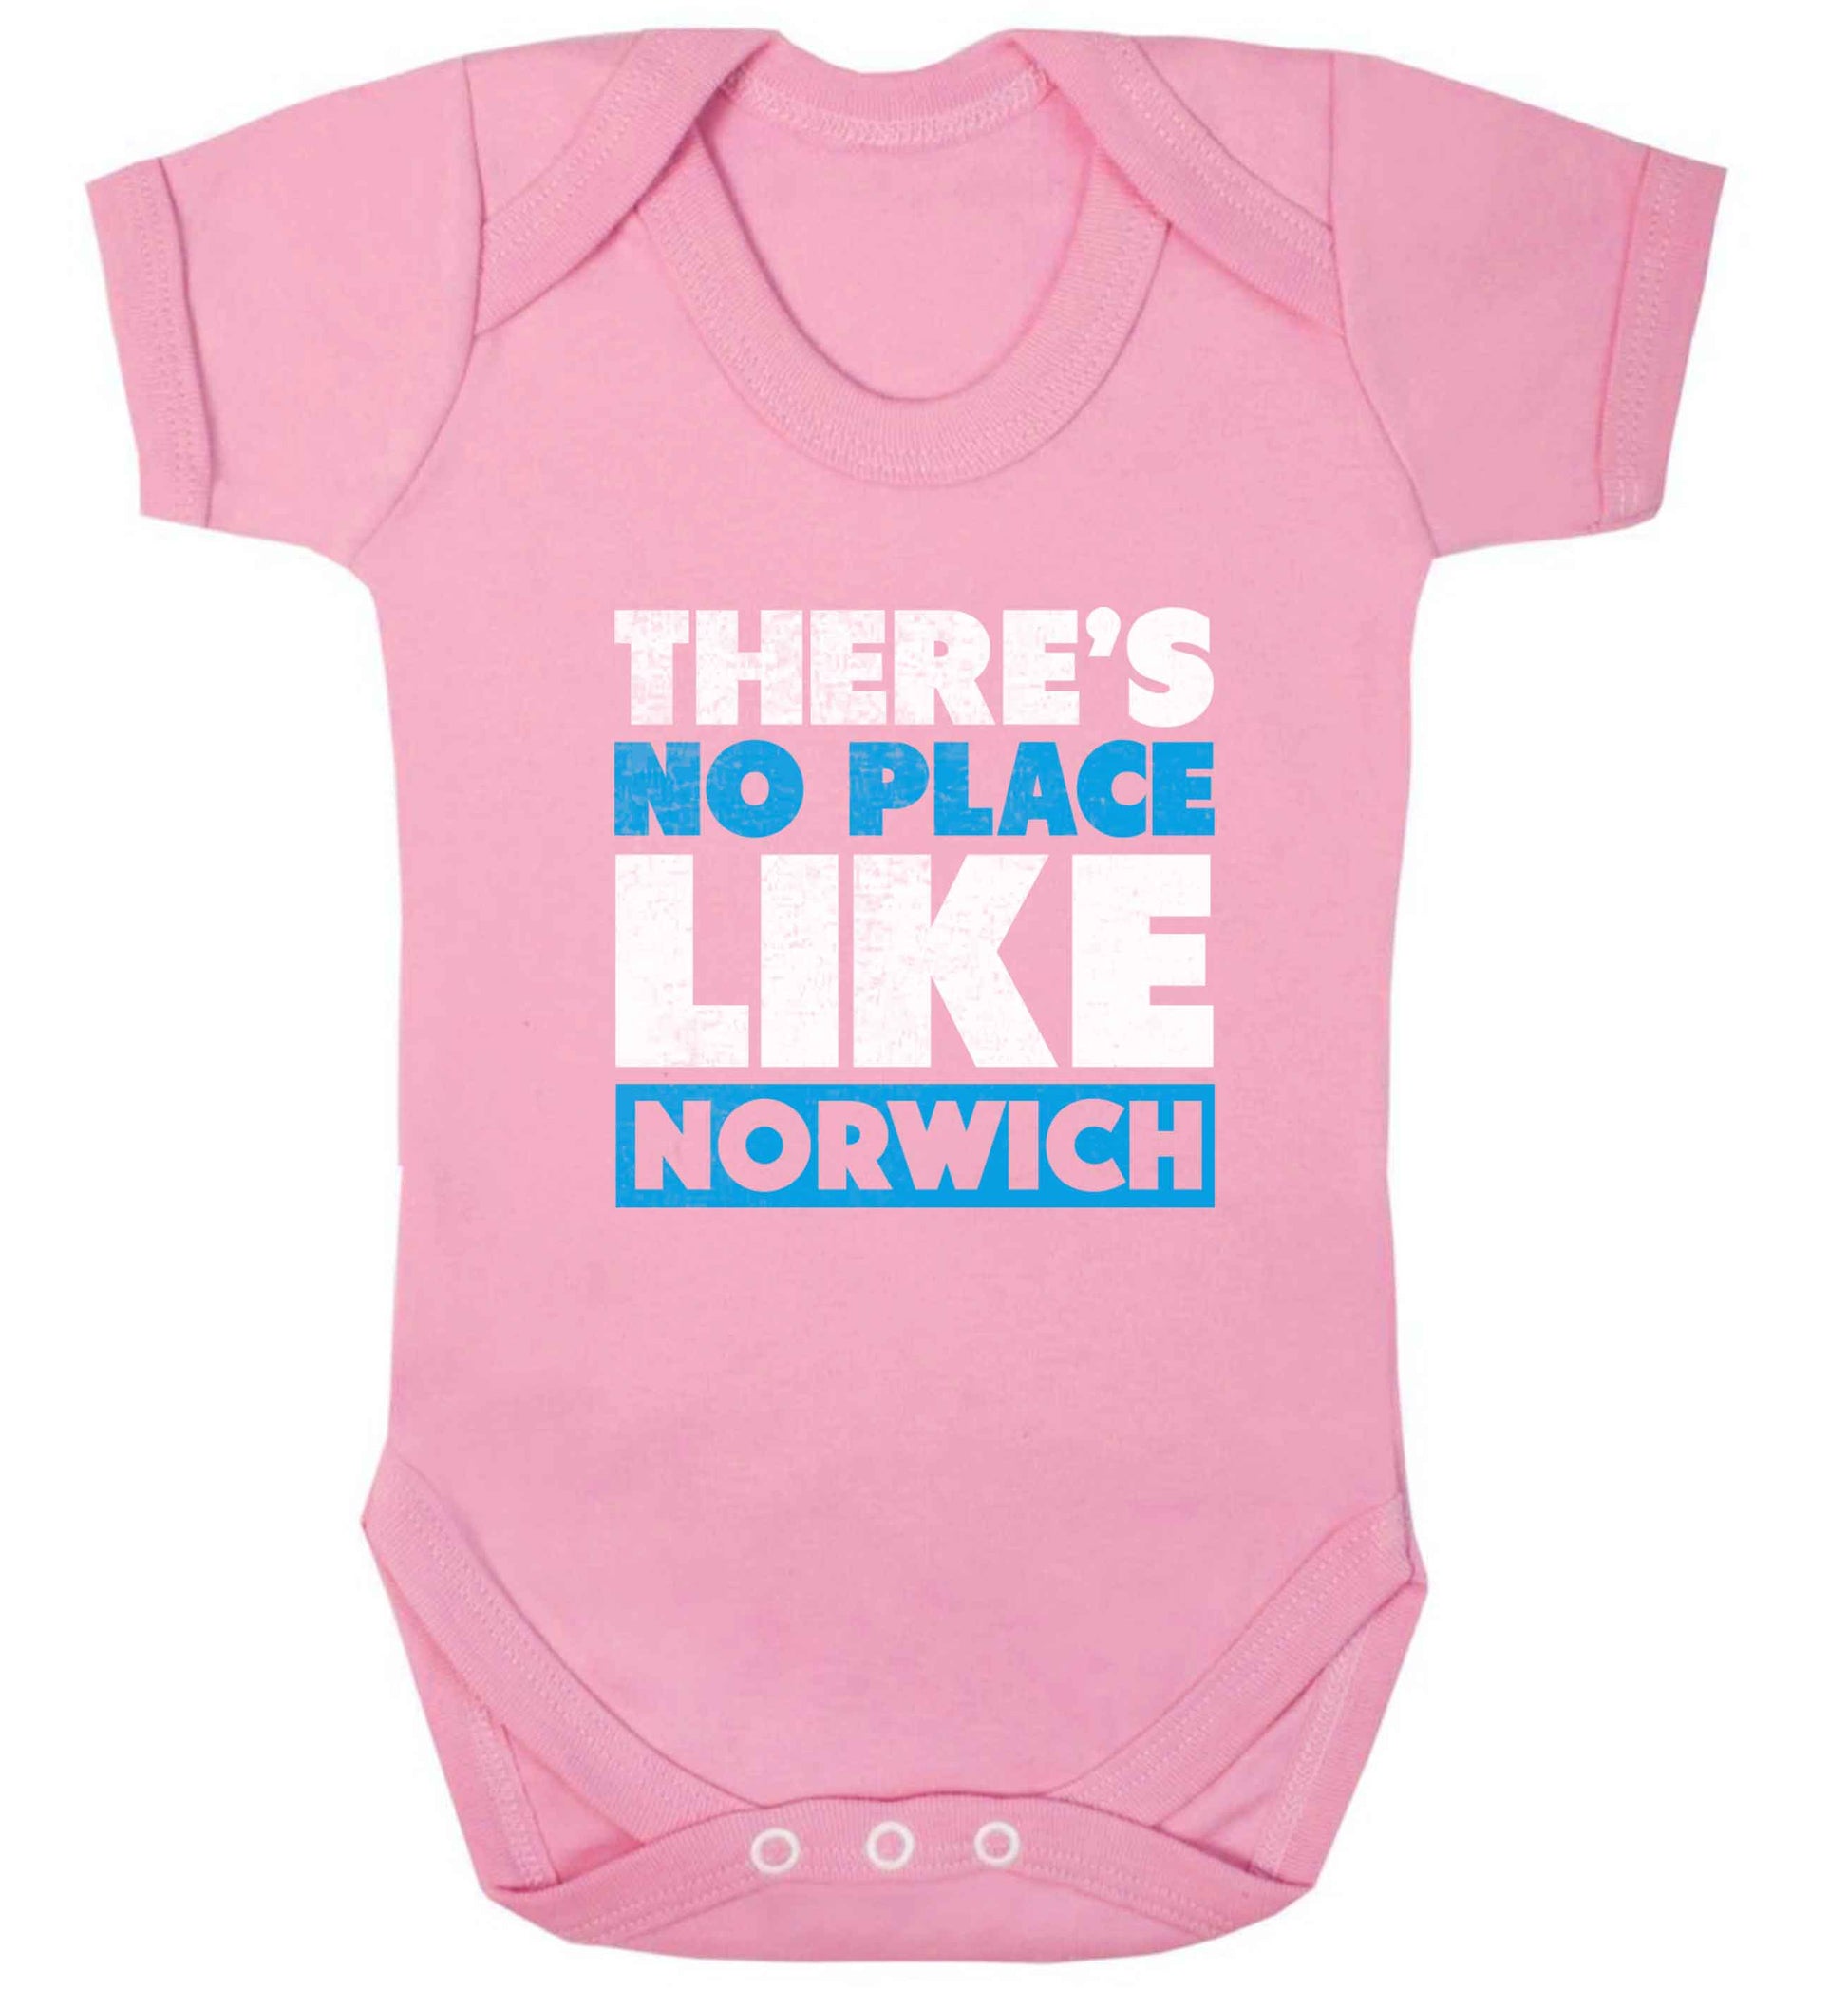 There's no place like Norwich baby vest pale pink 18-24 months